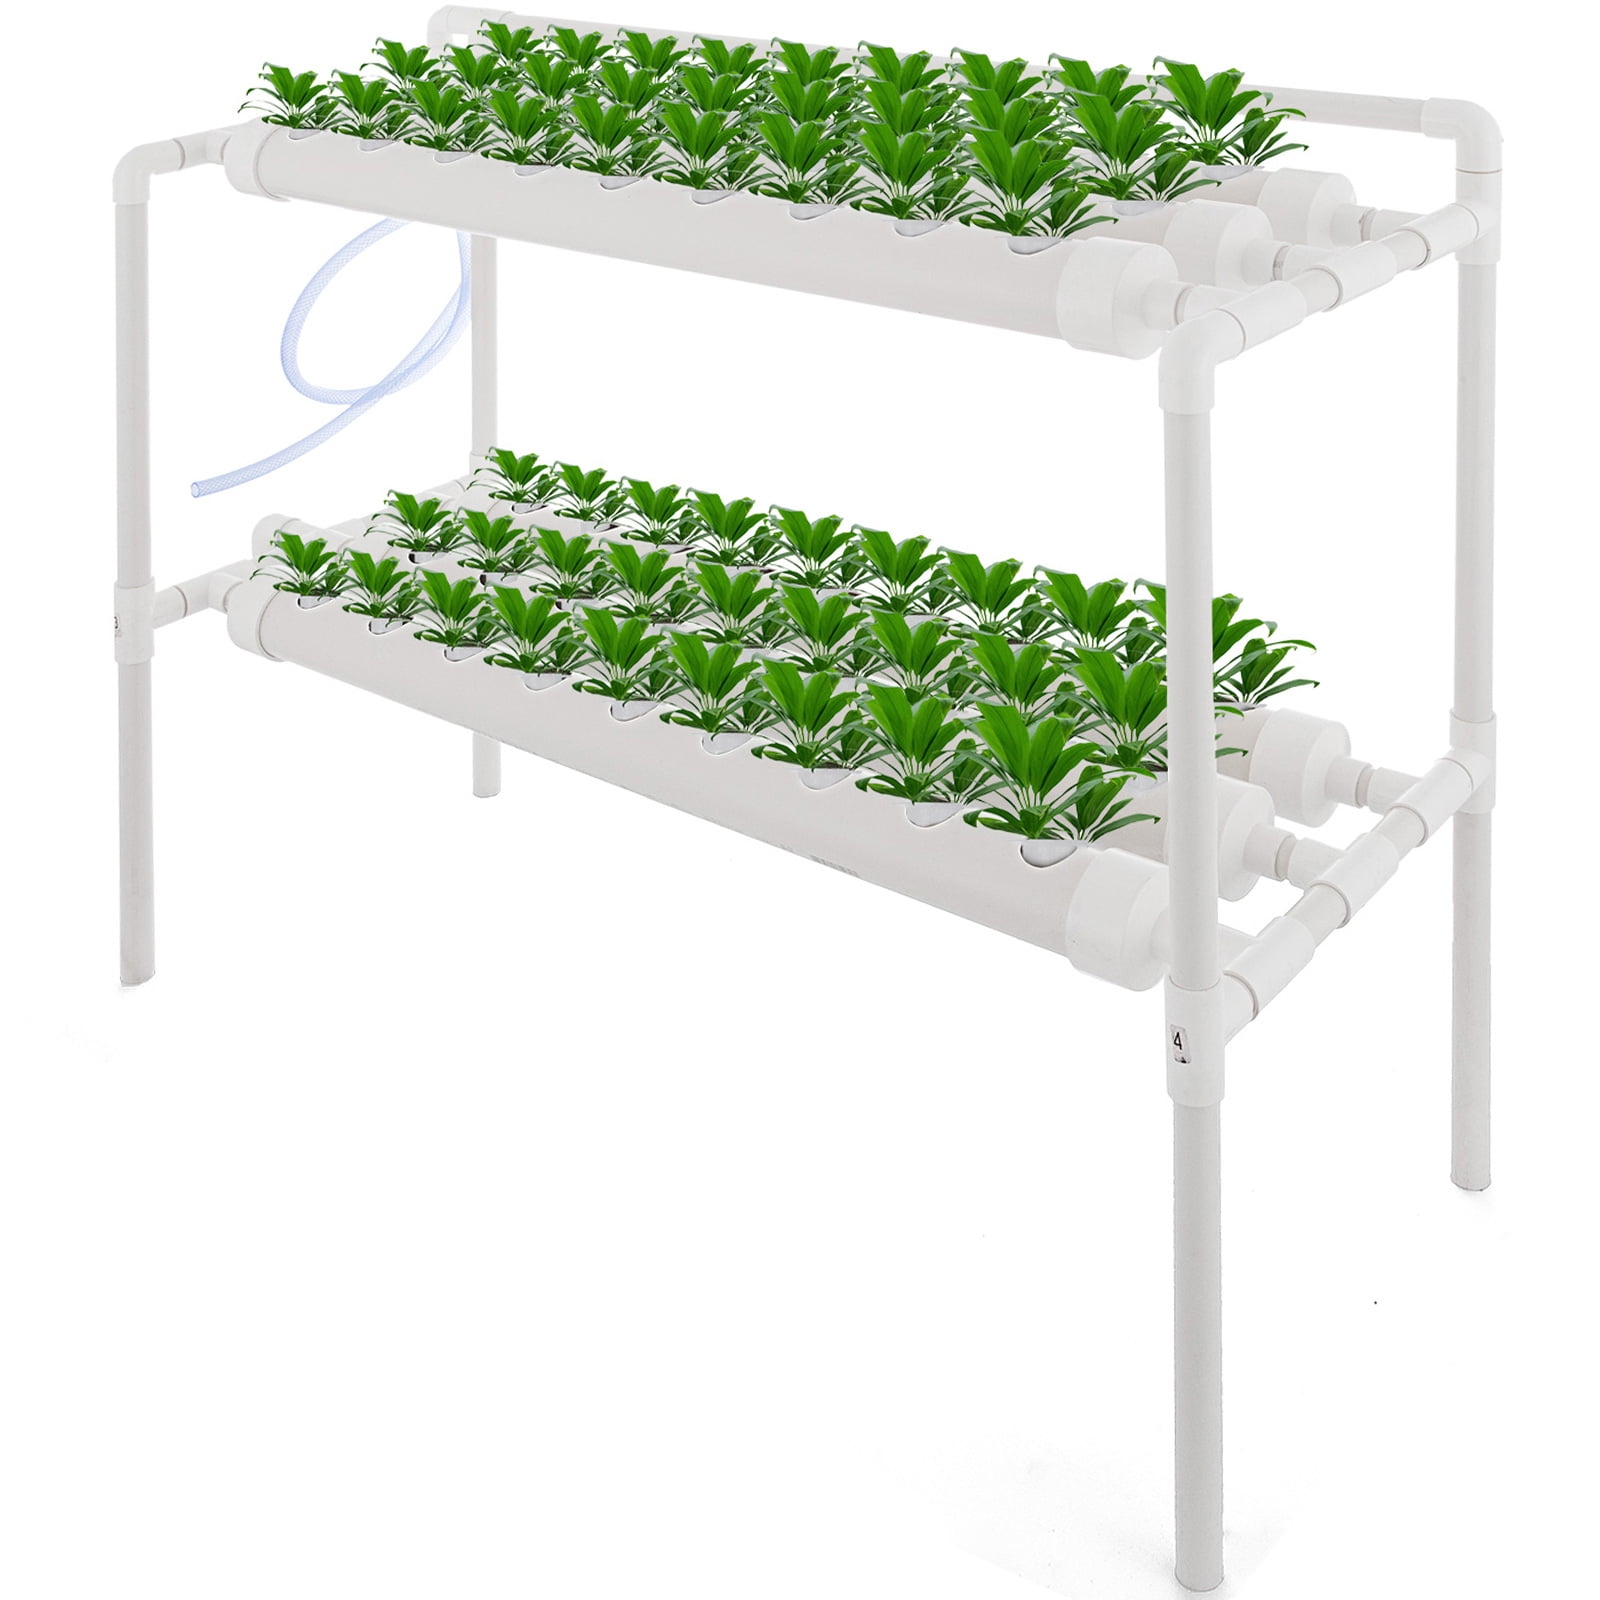 VEVOR 2 Layers 54 Plant Sites Hydroponic Site Grow Kit 6 Pipes Hydroponic Growing System Water Culture Garden Plant System for Leafy Vegetables Lettuce Herb Celery Cabbage